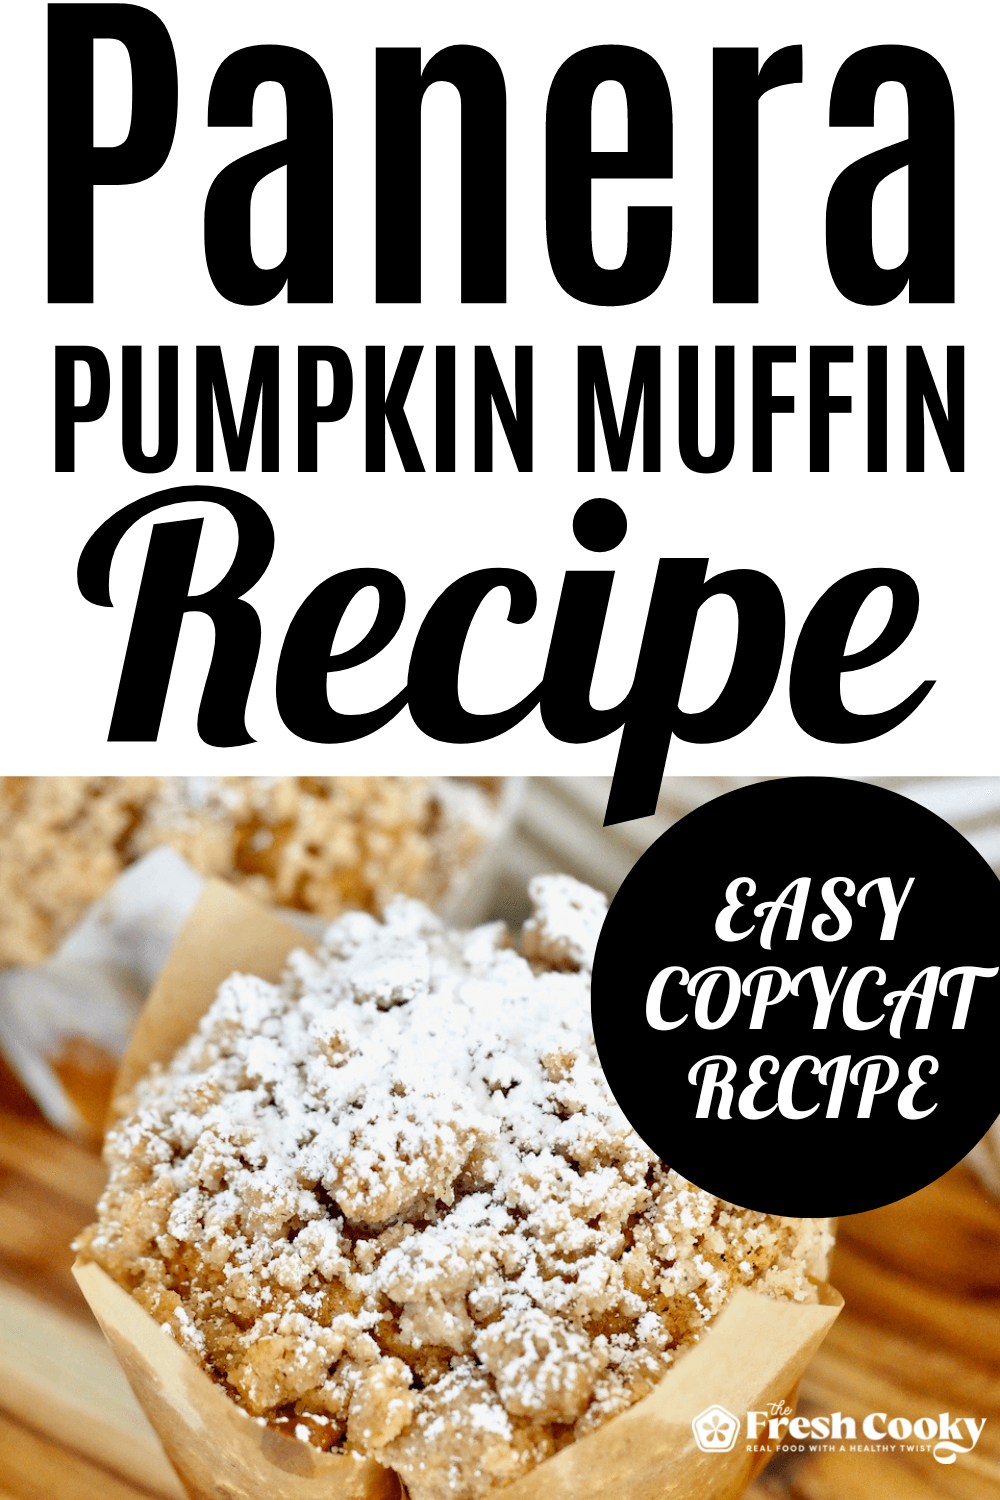 Panera pumpkin muffin recipe pin with image of large pumpkin muffin, topped with streusel and dusted with powdered sugar.